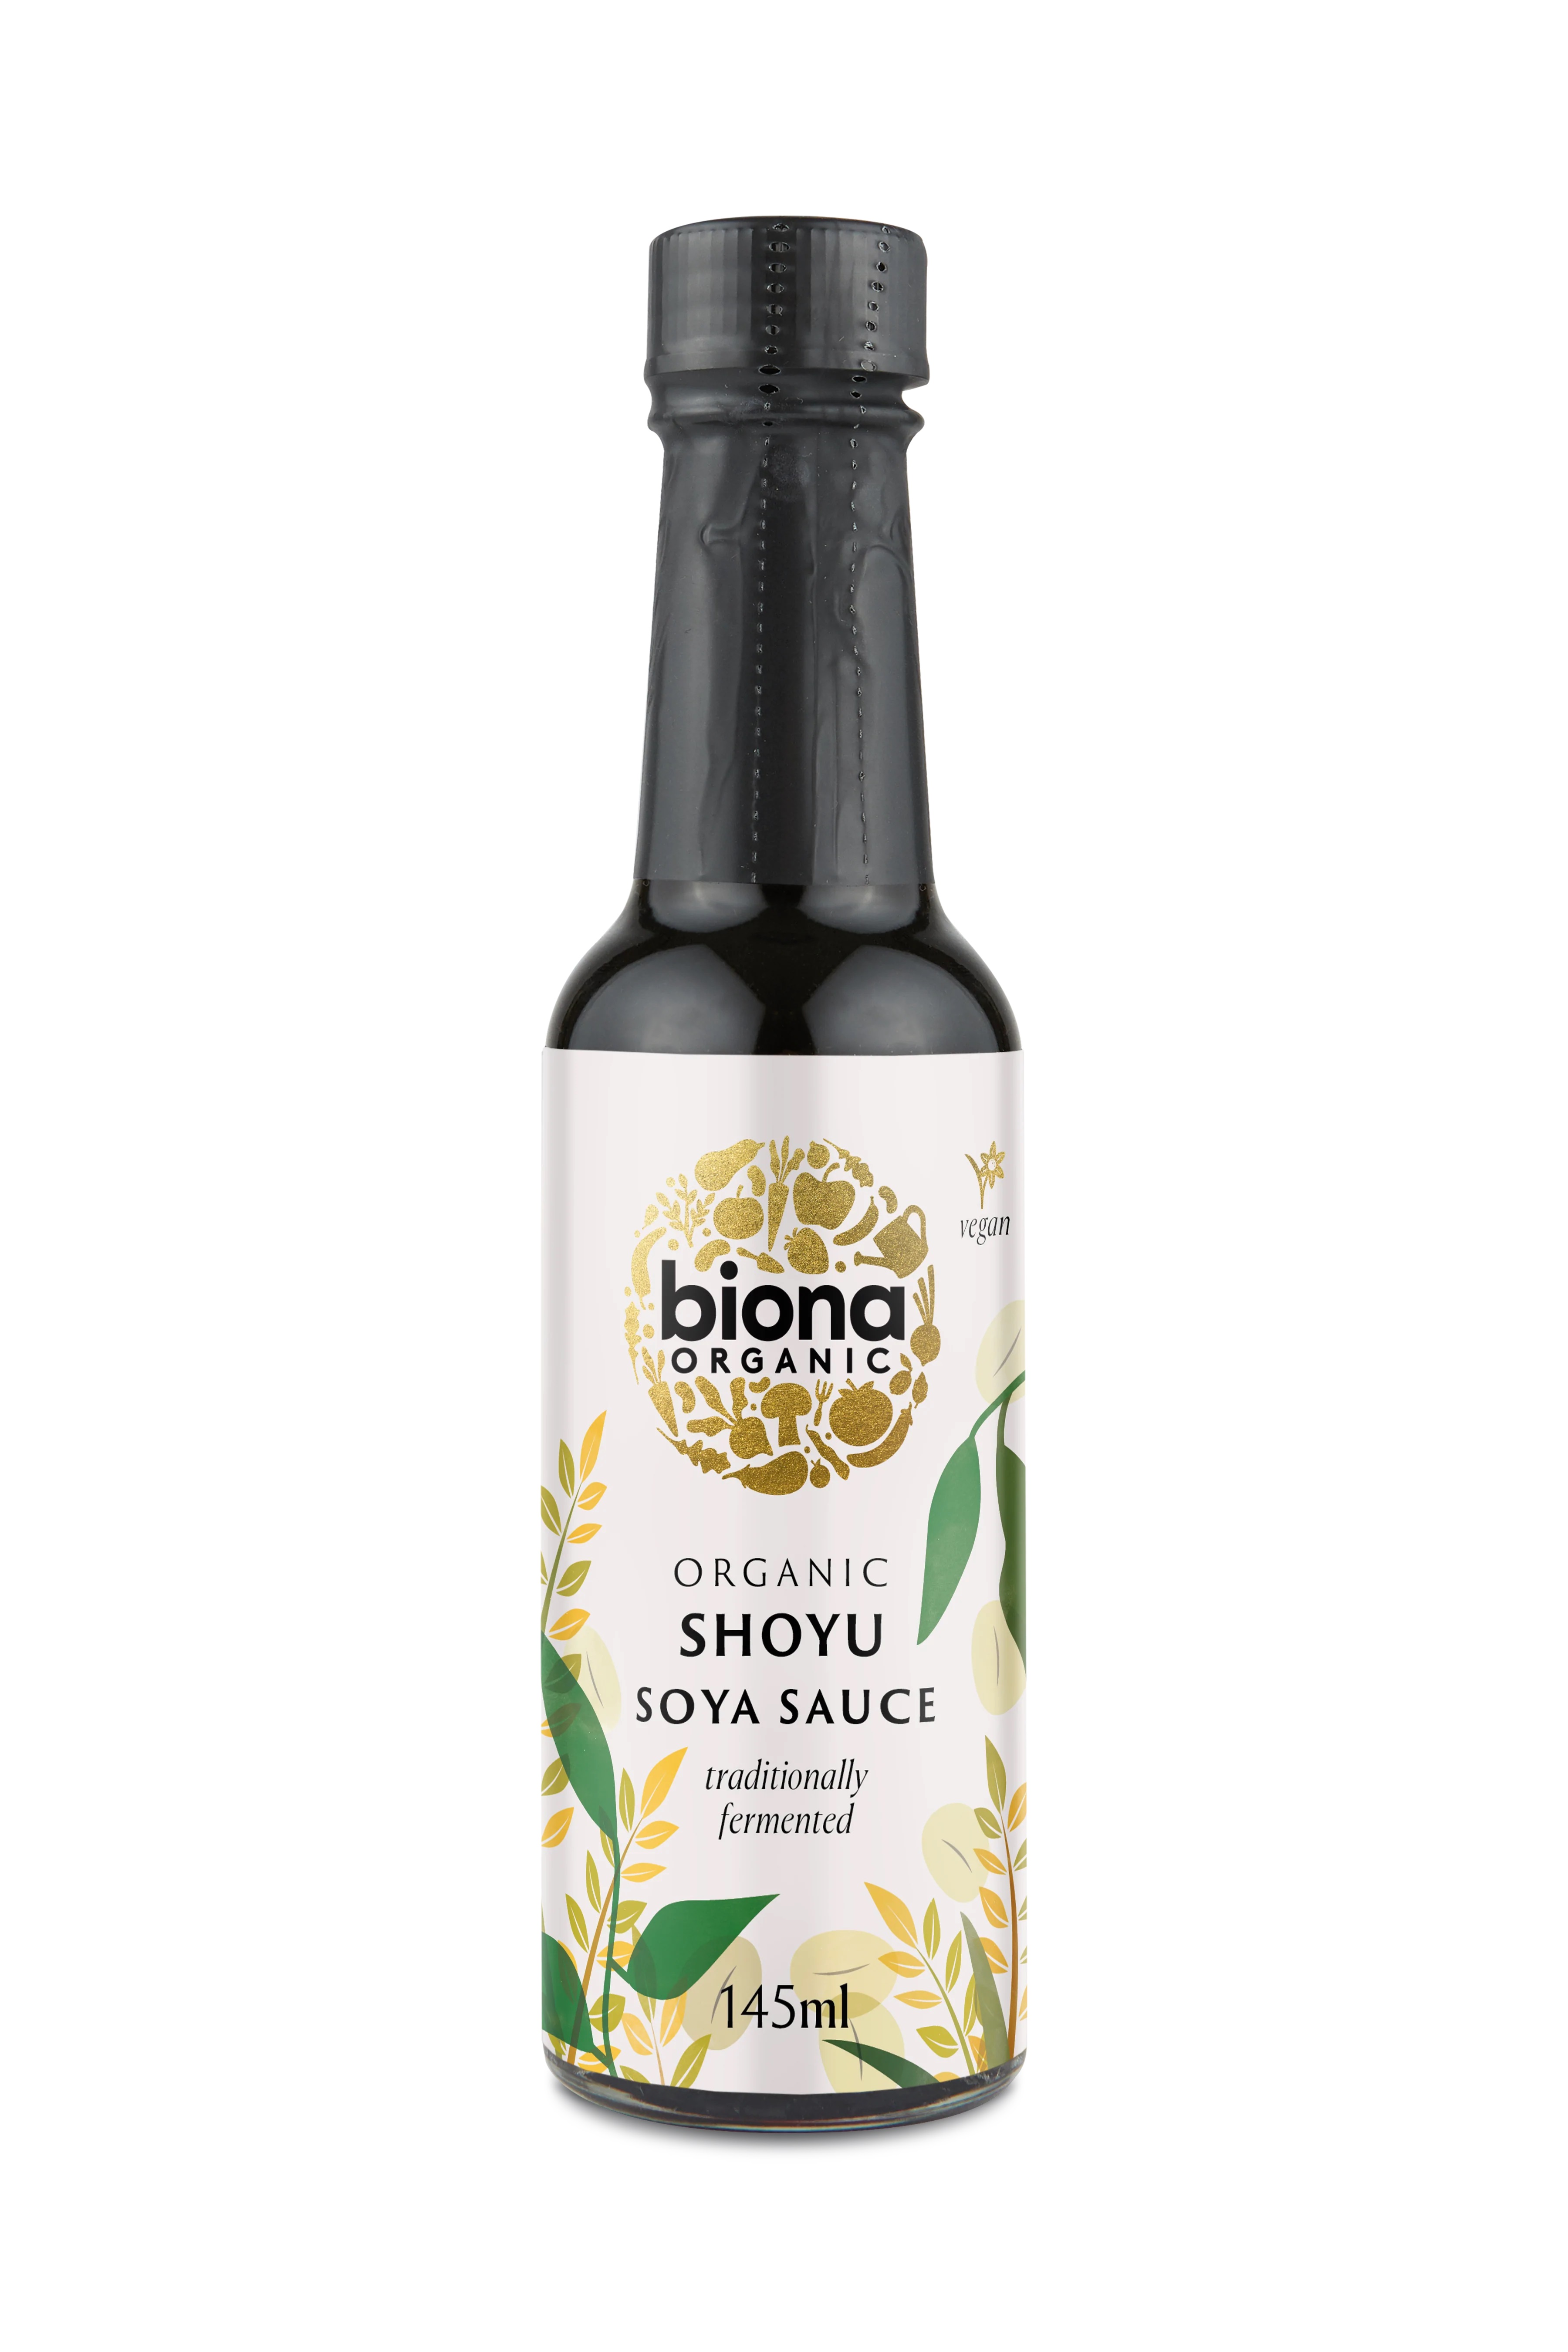 <h2>Sos de soia Shoyu eco 145ml Biona</h2><p>-vegan-</p><p><strong>Ingrediente: </strong>apa, boabe de soia* 22%, <strong>GRAU*</strong>, sare de mare</p><p>*din agricultura ecologica</p><p><strong>Alergeni:</strong> Contine cereale ce contine <strong>GLUTEN</strong>. Vezi ingrediente cu majuscule. </p><p><strong>Valori nutritionale/100ml:</strong><br />Energie: 234KJ/56Kcal<br />Grasimi: 0.6g din care saturate 0.1g<br />Carbohidrati: 4.1g din care zaharuri 0.4g<br />Fibre: 0.8g<br />Proteine: 8.1g<br />Saruri: 13.73g</p><p>Produs certificat ecologic, ambalat in sticla.&nbsp;</p><p>Agricultura non-UE</p><p>145ml</p><p>&nbsp;</p>